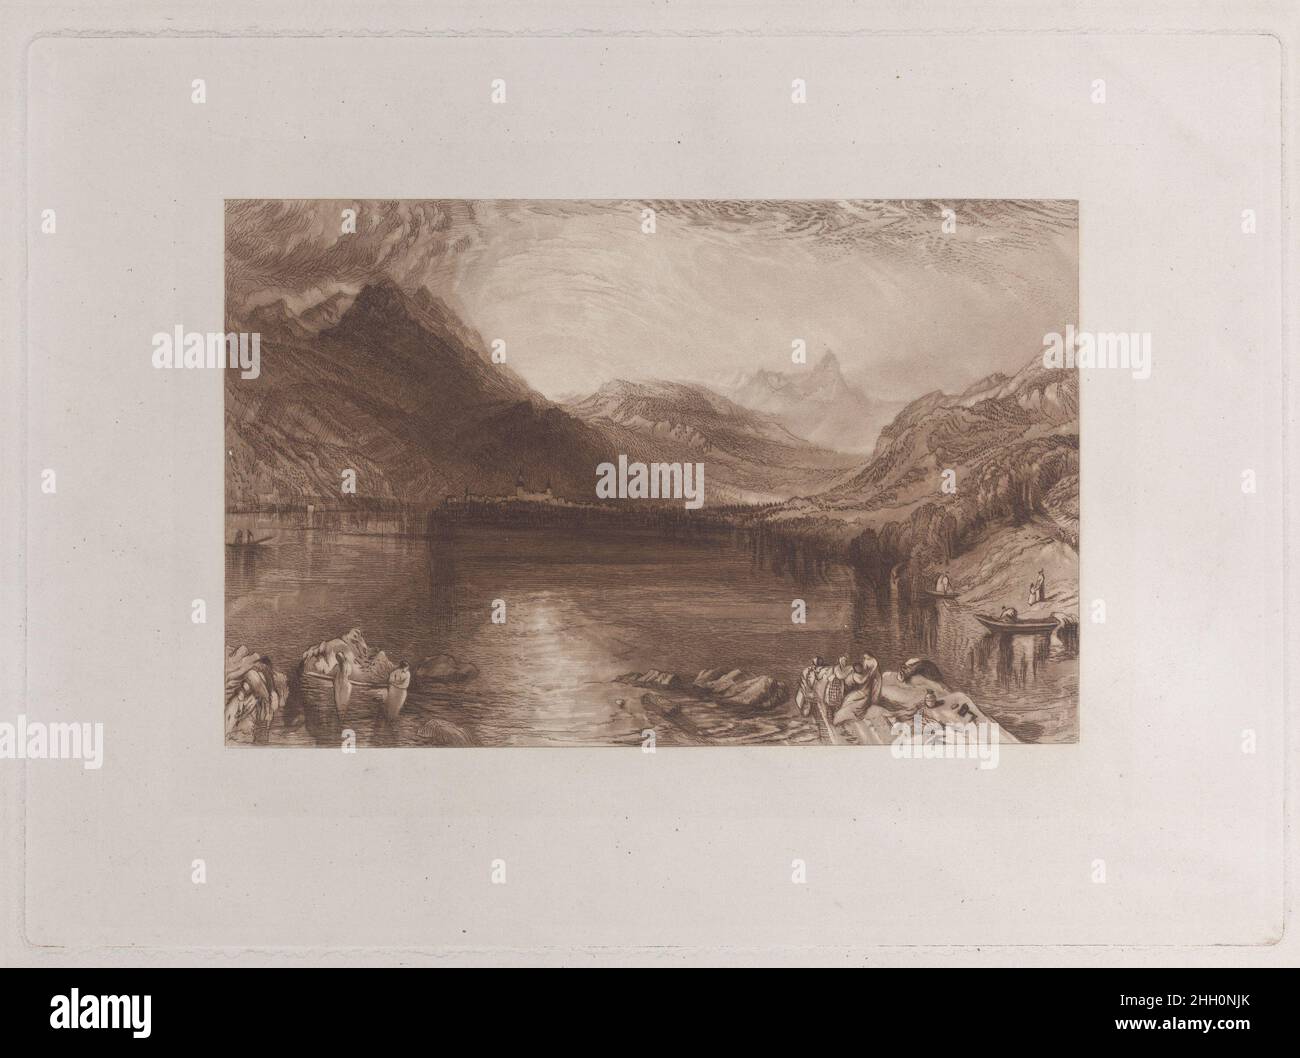 The Lake of Zug 1888 Etched by John Ruskin British When John Ruskin owned Turner's watercolor of the Lake of Zug (now at the Metropolitan Museum), he etched the subject in outline around 1856, with mezzotint then added by Lupton. The resulting print was used to illustrate Ruskin's Modern Painters, 1888, vol. V, pl. 87 (and Works, vol. VII, p. 439, pl. 87).. The Lake of Zug. After Joseph Mallord William Turner (British, London 1775–1851 London). 1888. Etching and mezzotint; proof. Mezzotint by Thomas Goff Lupton (British, London 1791–1873 London). Prints Stock Photo